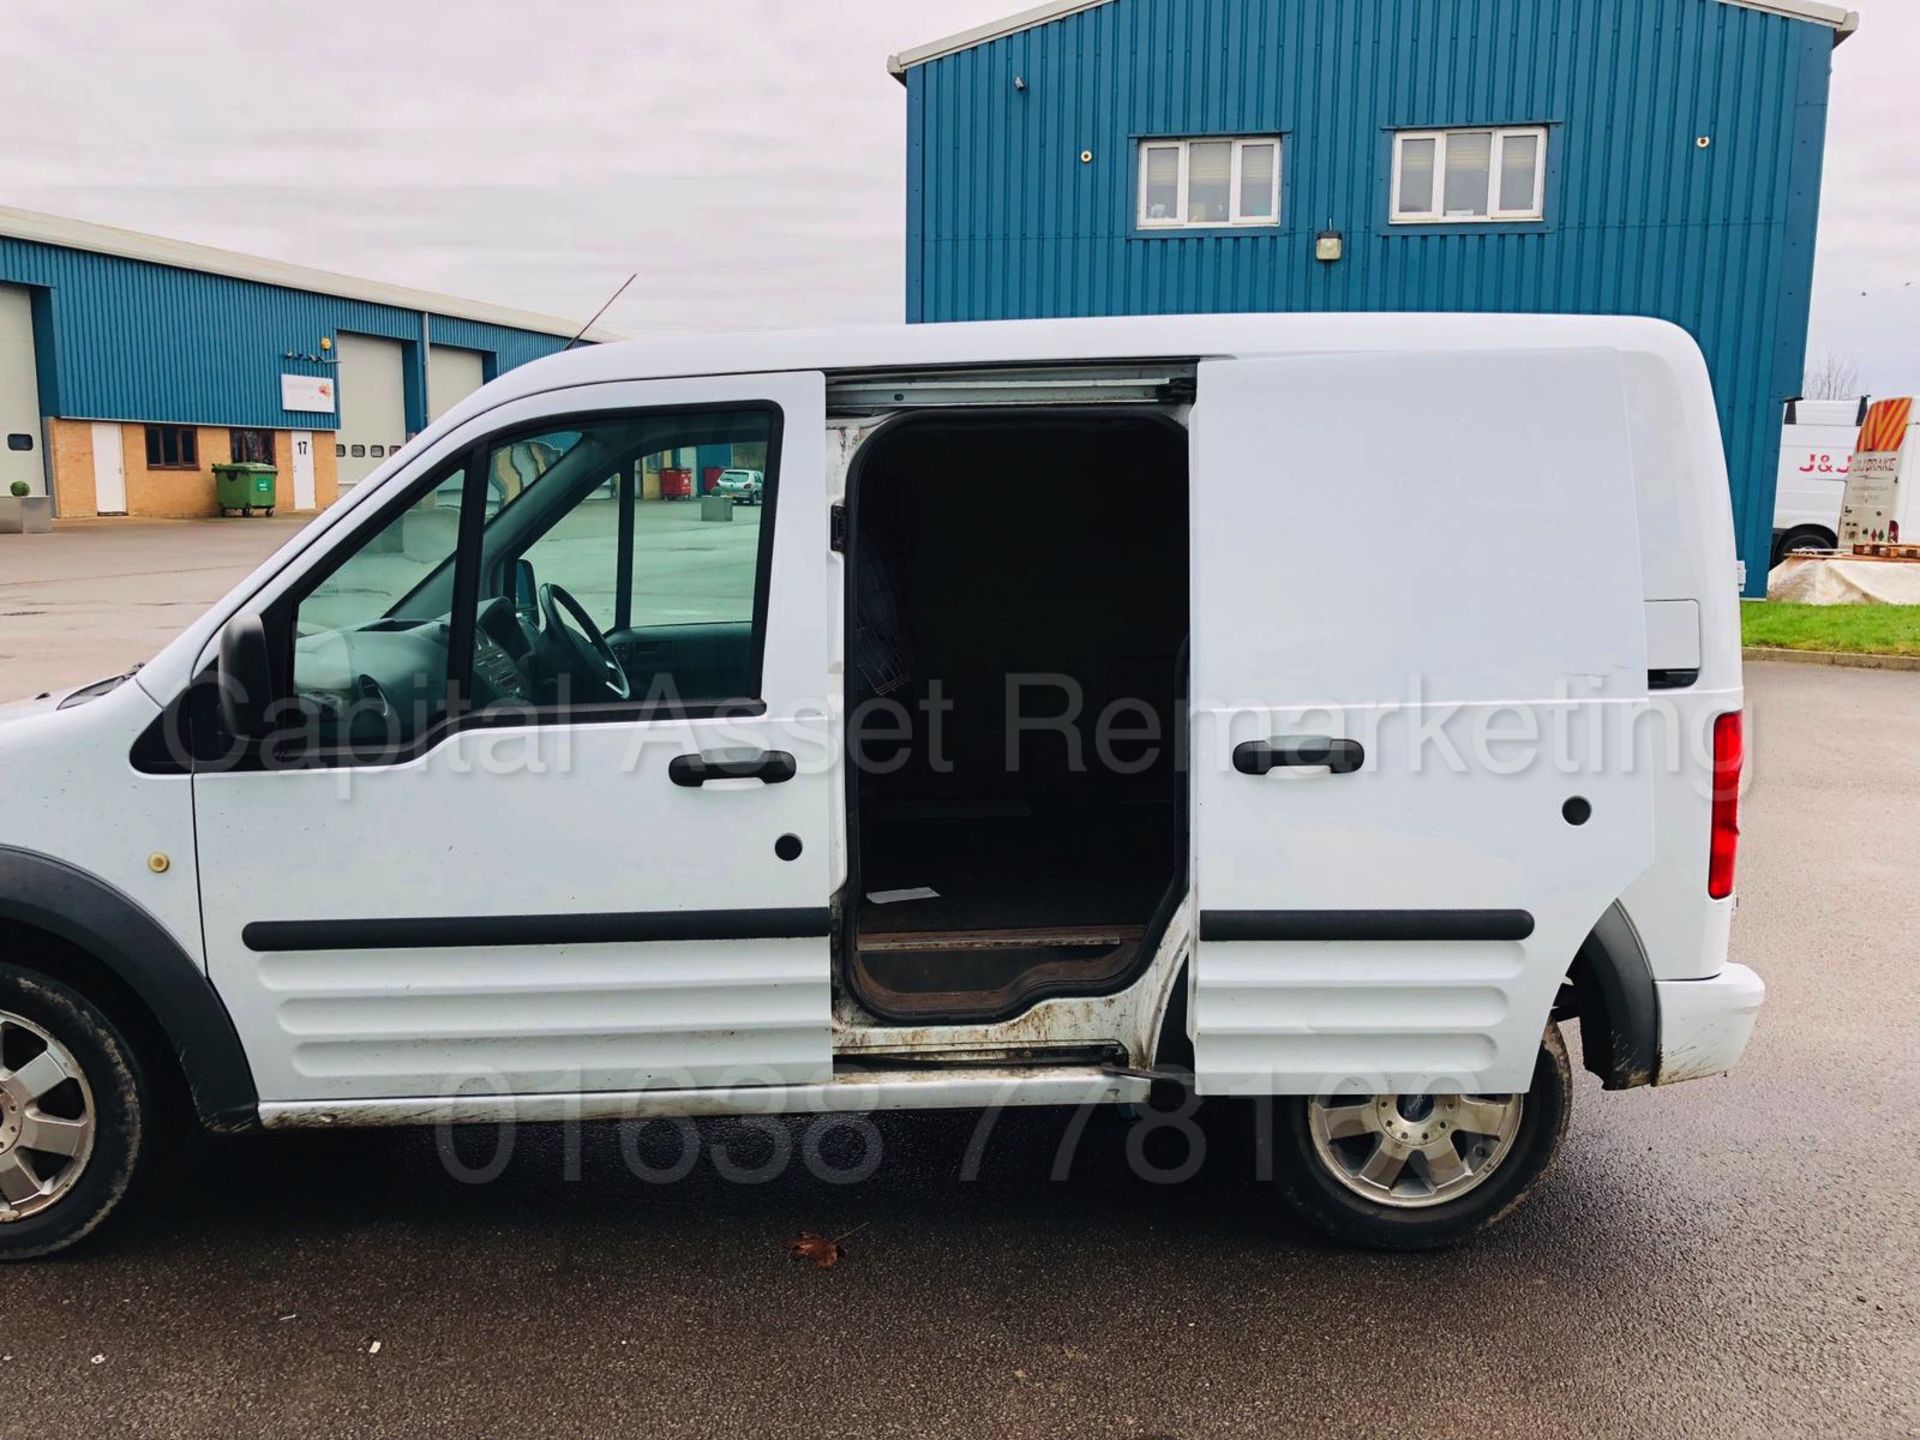 (On Sale) FORD TRANSIT CONNECT T200 *PANEL VAN* (2012) '1.8 TDCI - 5 SPEED' **AIR CON** (LOW MILES) - Image 20 of 25